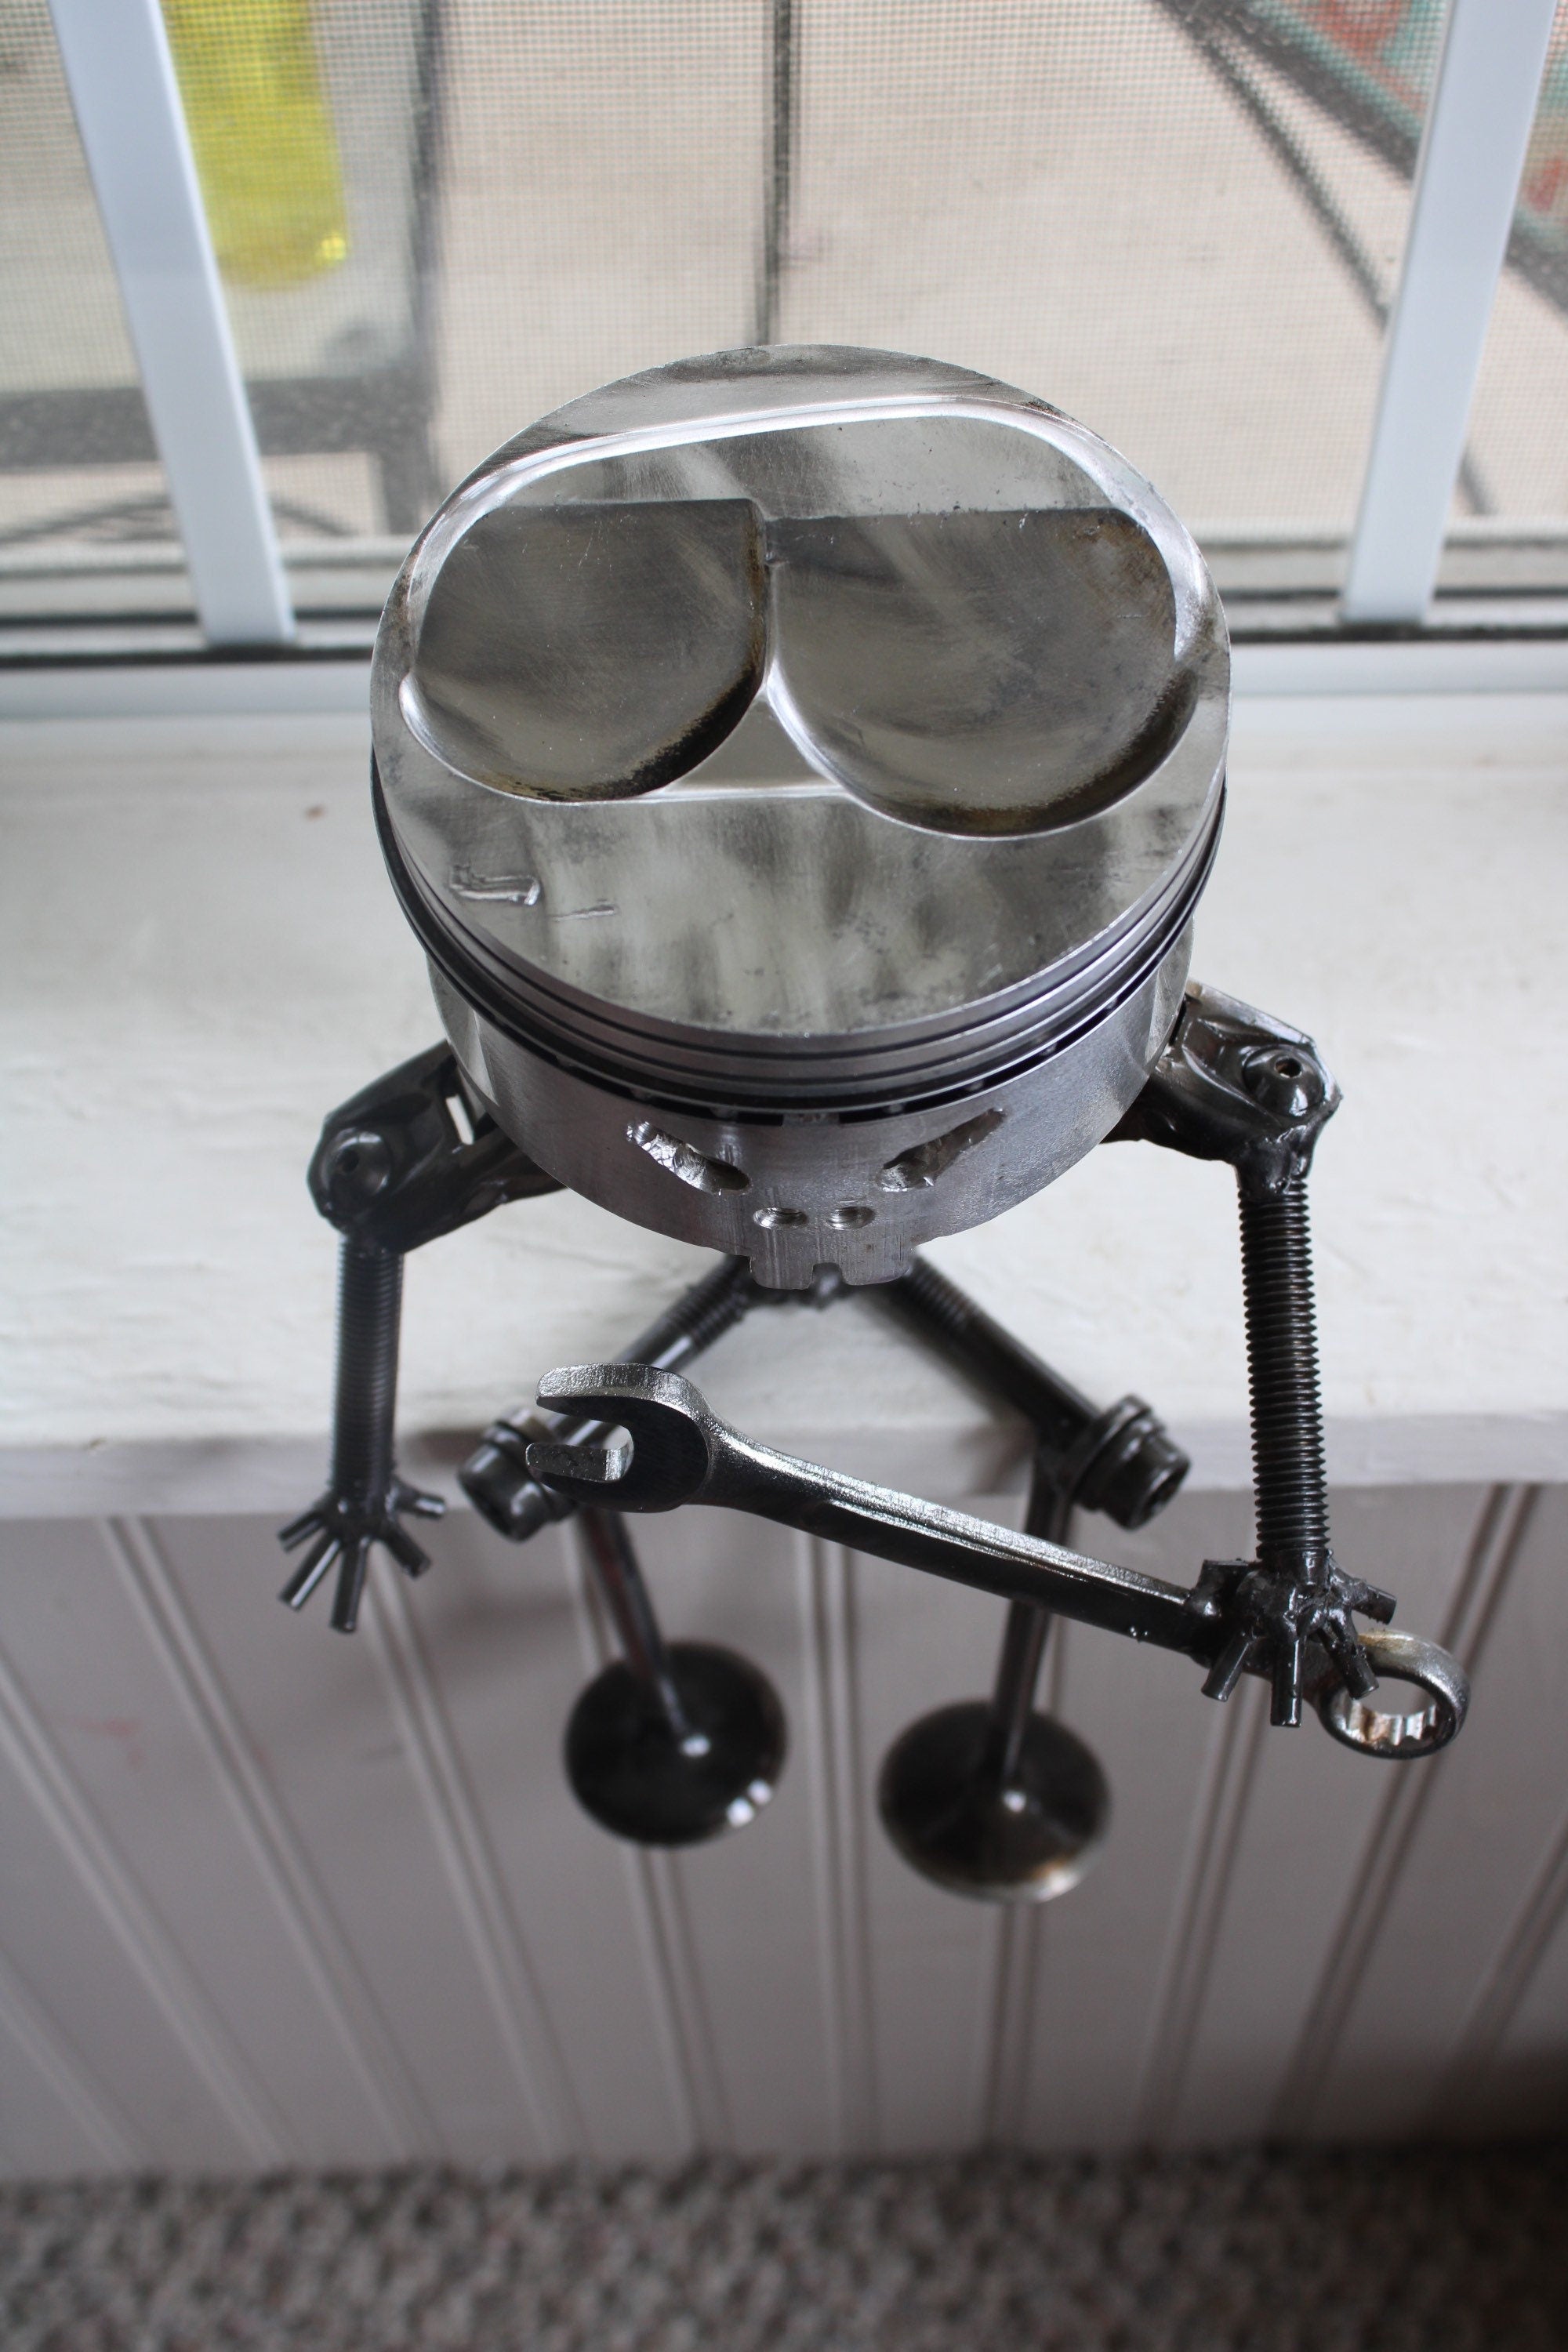 Birds-eye view of a piston man car part sculpture sitting on a windowsill and holding a wrench.